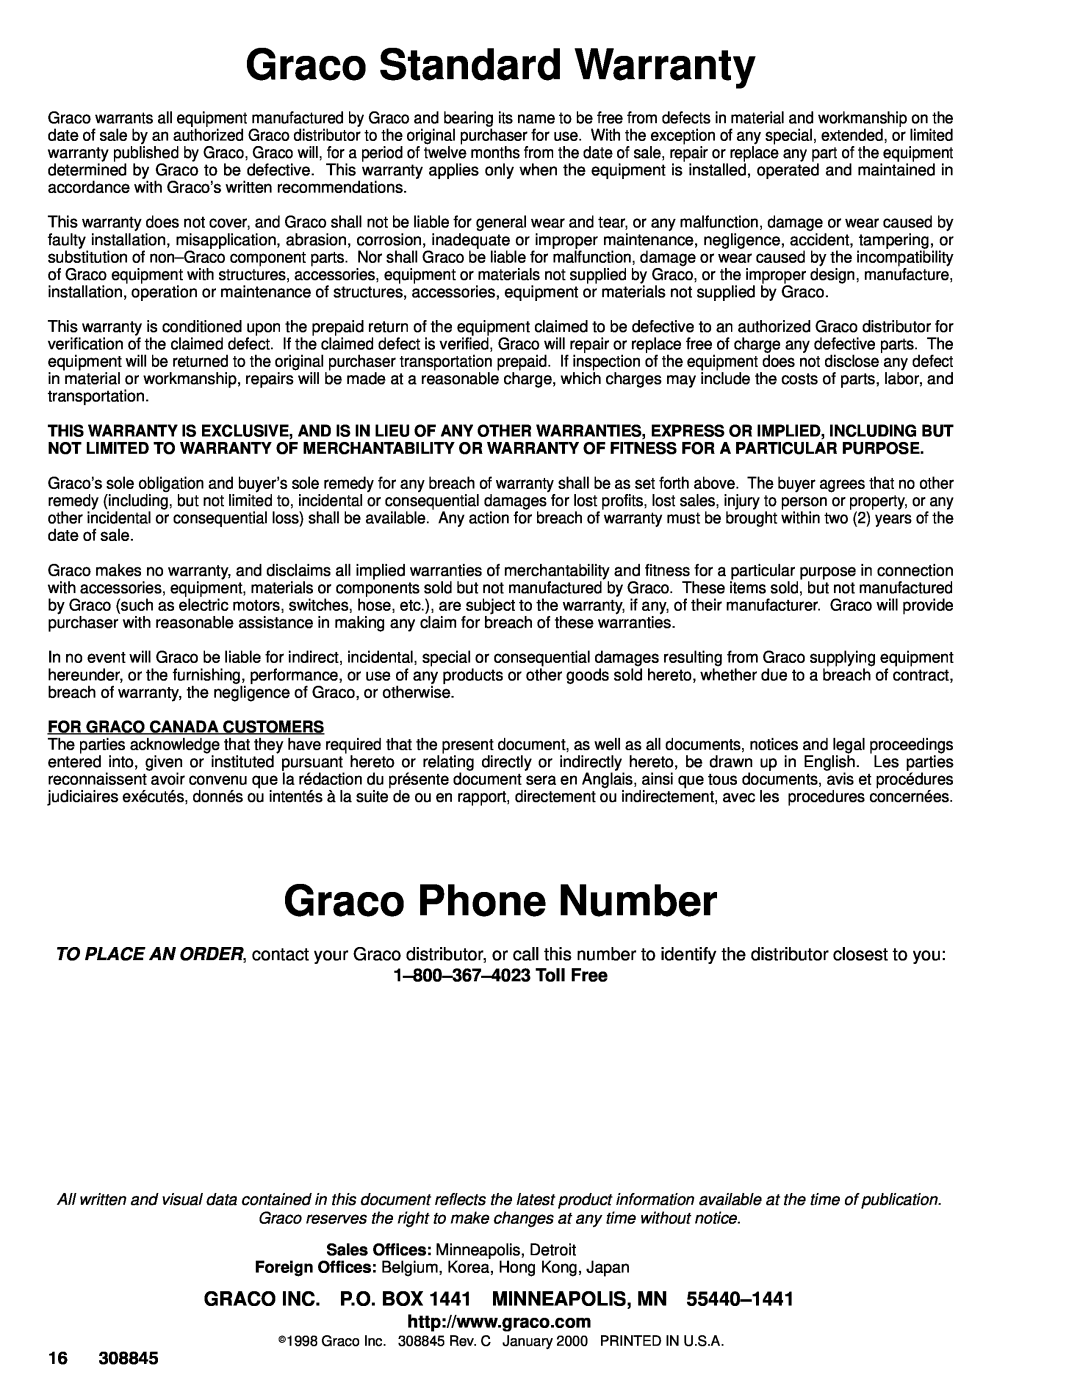 Hitachi 240353 manual Graco Standard Warranty, Graco Phone Number, For Graco Canada Customers 